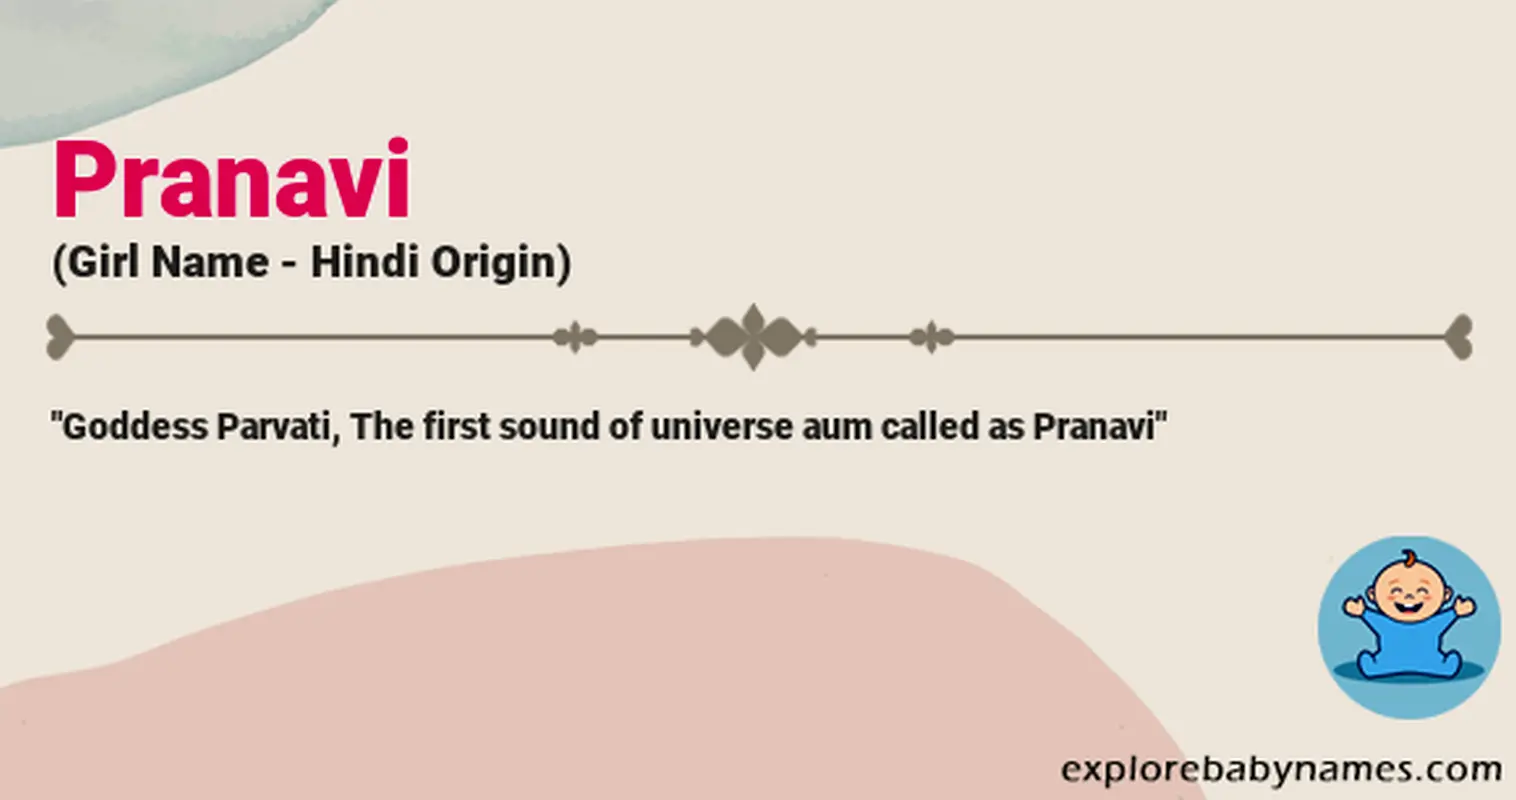 Meaning of Pranavi